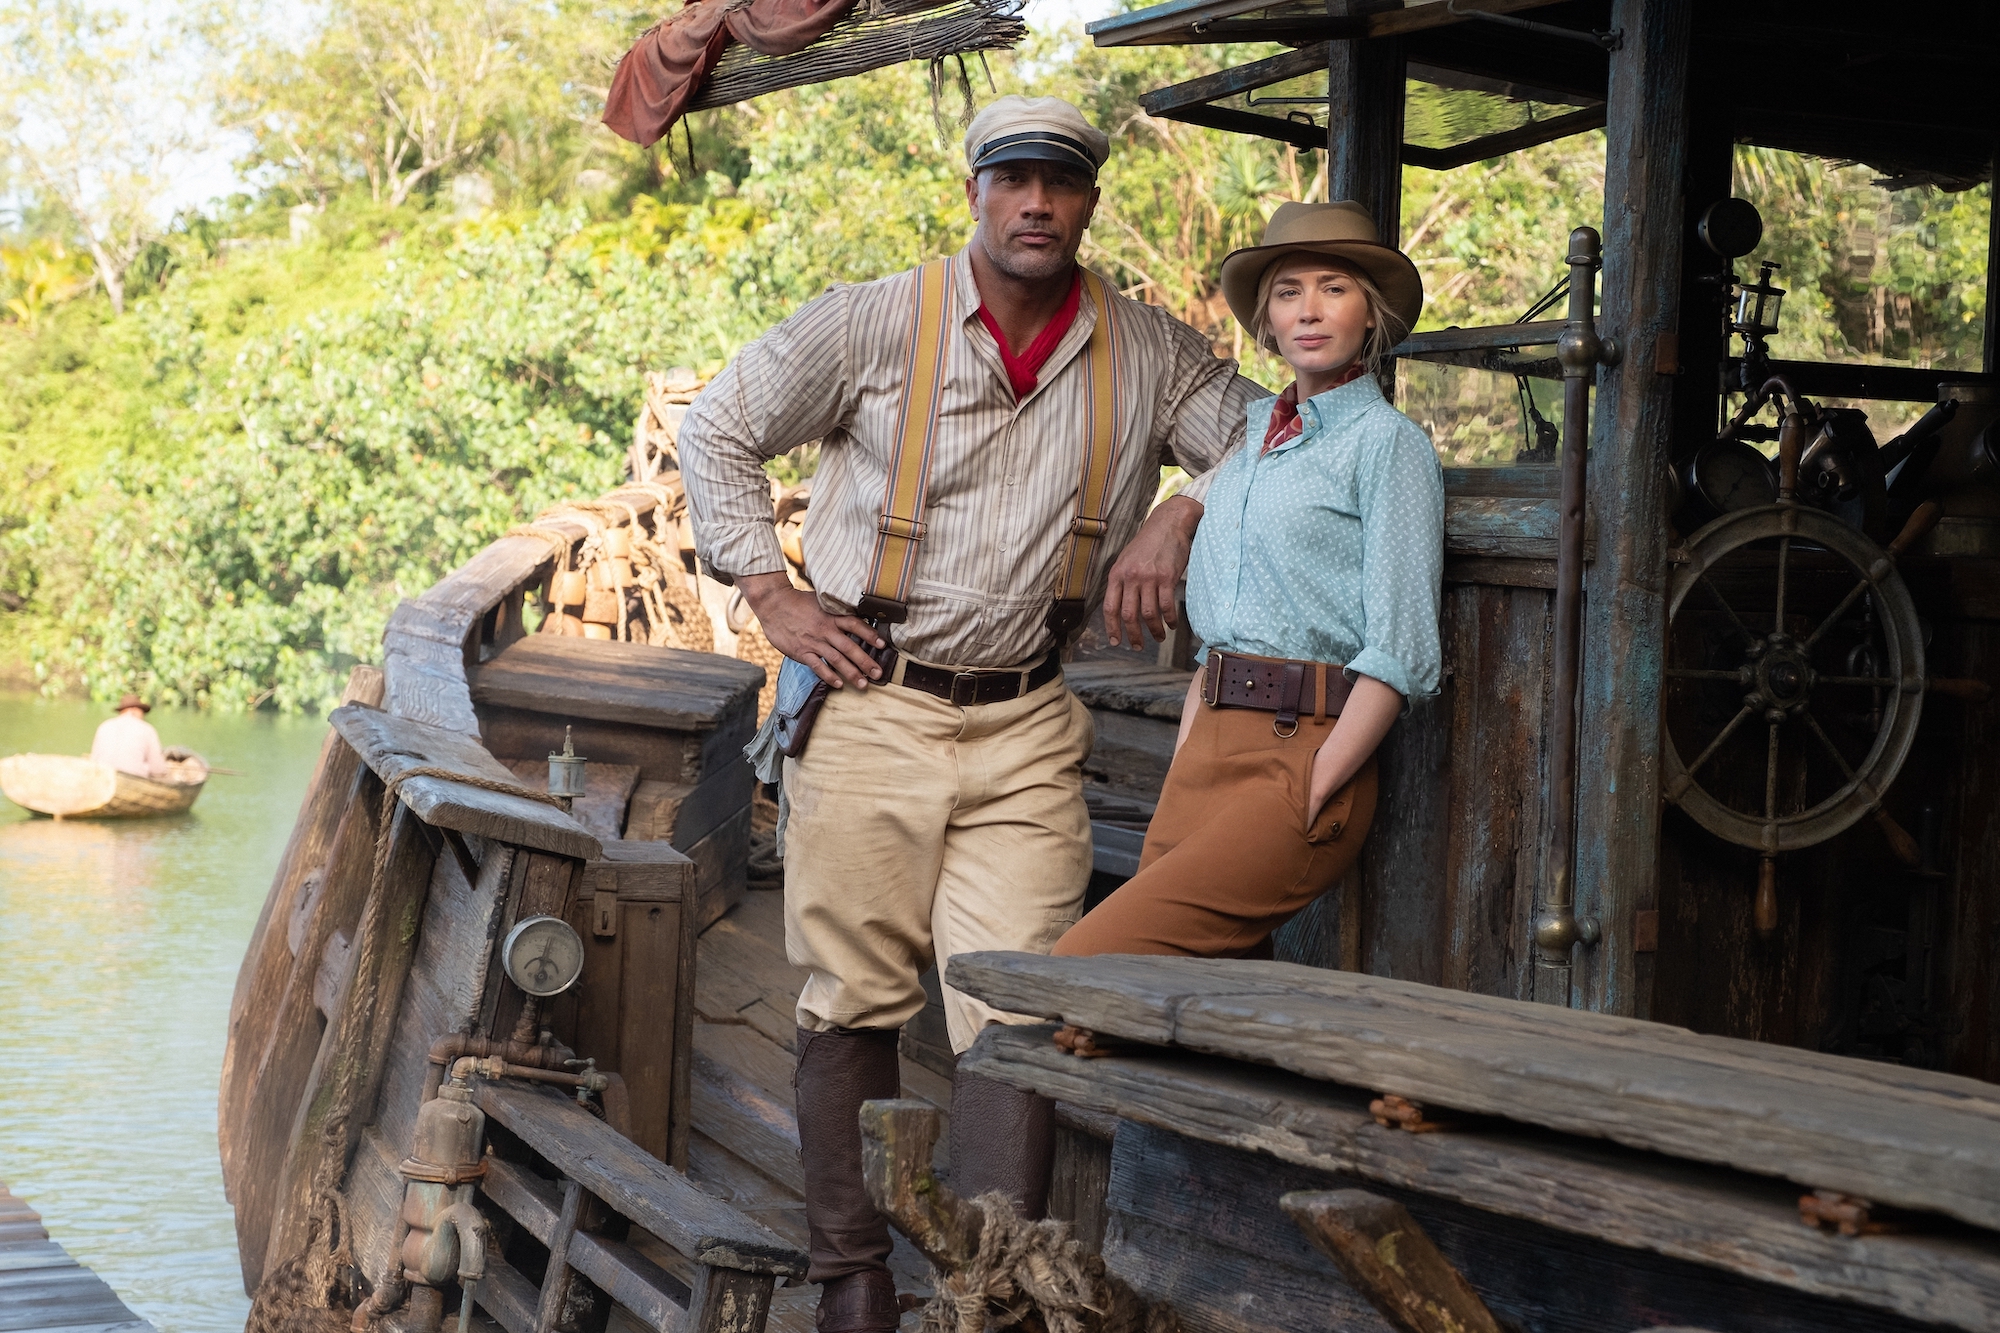 Jungle cruise captain Dwayne Johnson and passenger Emily Blunt lean on the boat